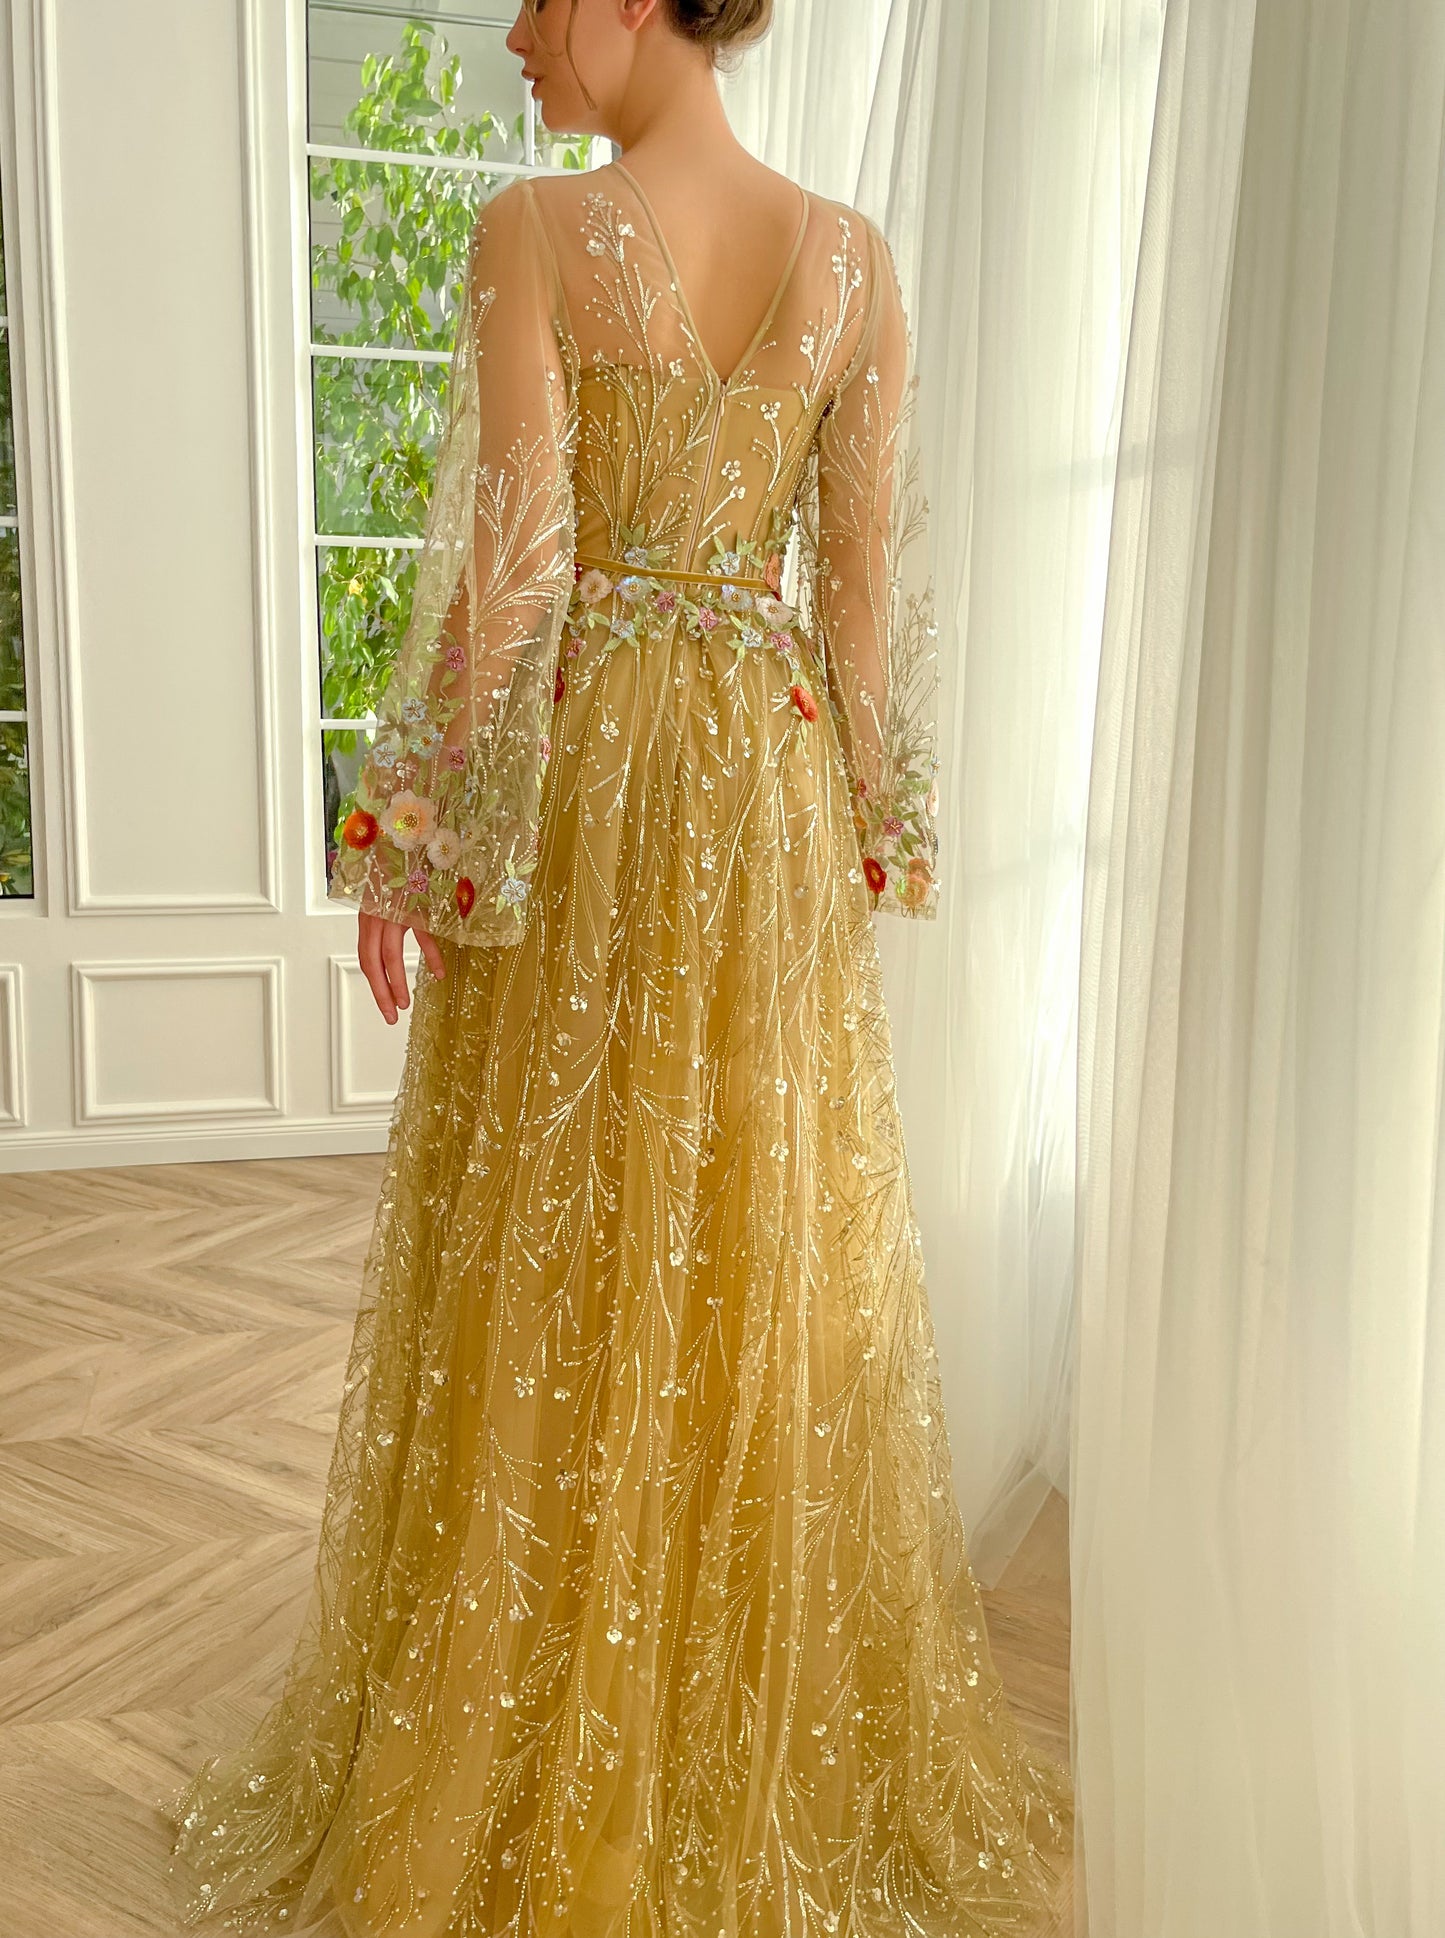 Gold A-Line dress with long sleeves, flowers and embroidery